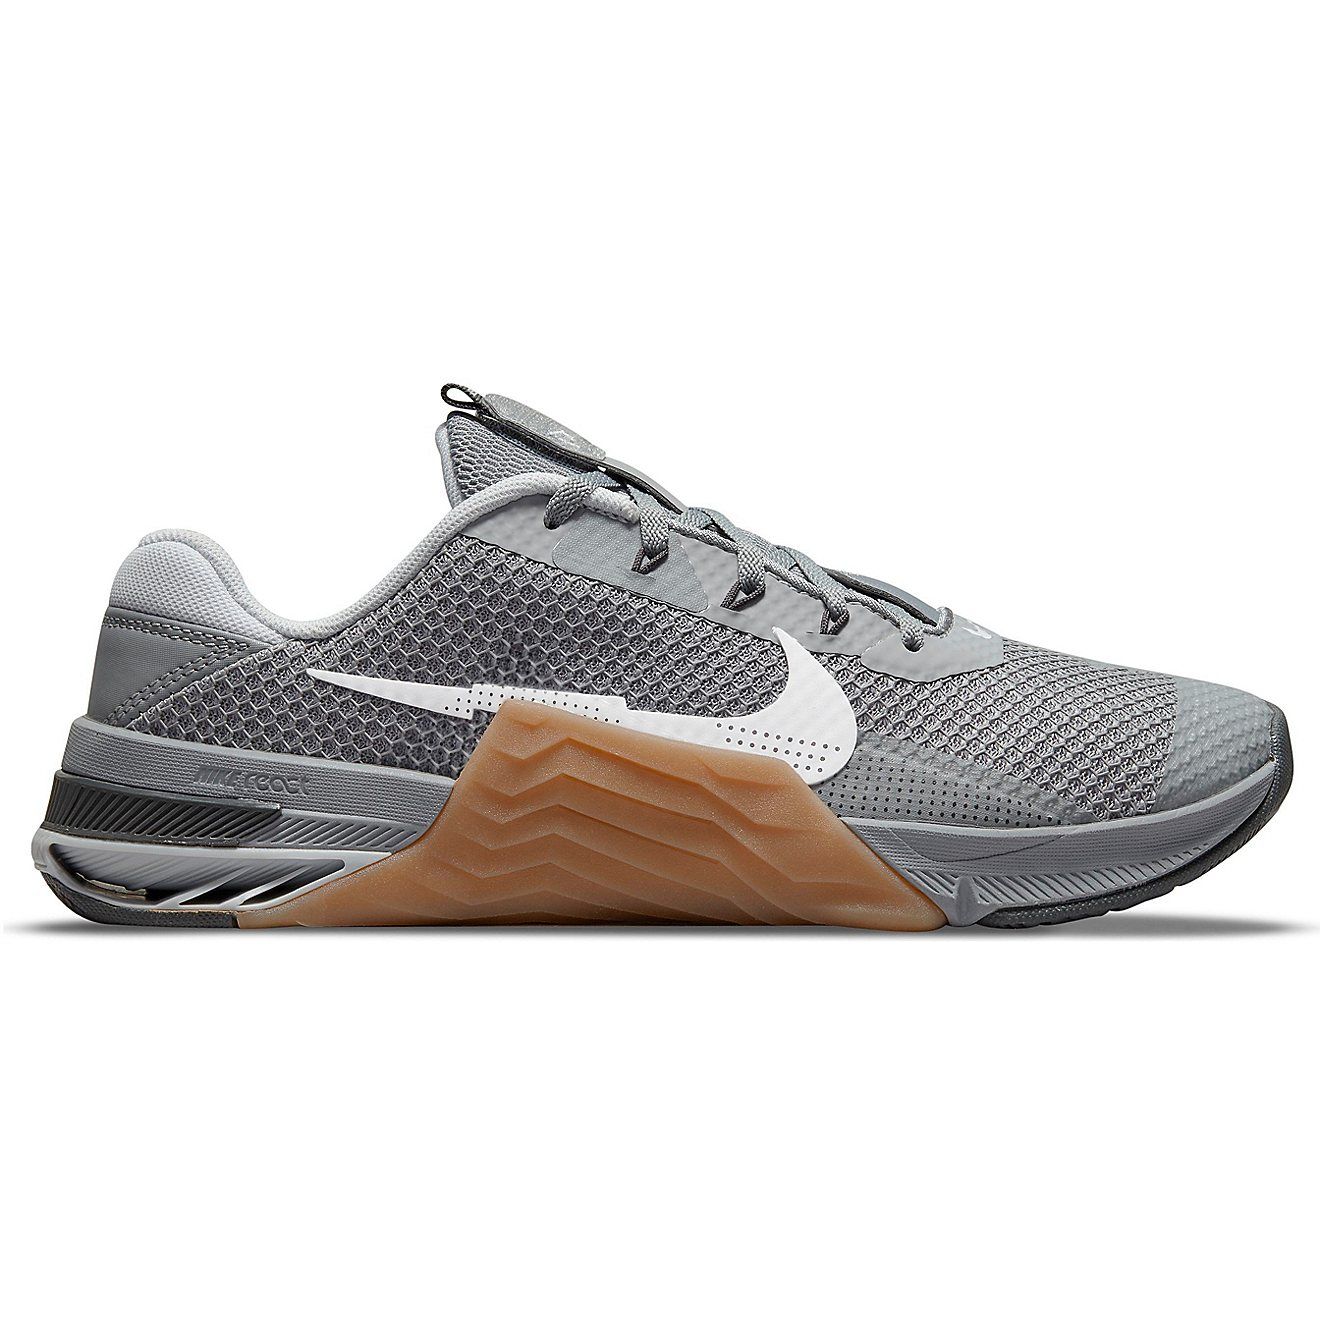 Nike Men's Metcon 7 Training Shoes | Academy | Academy Sports + Outdoors